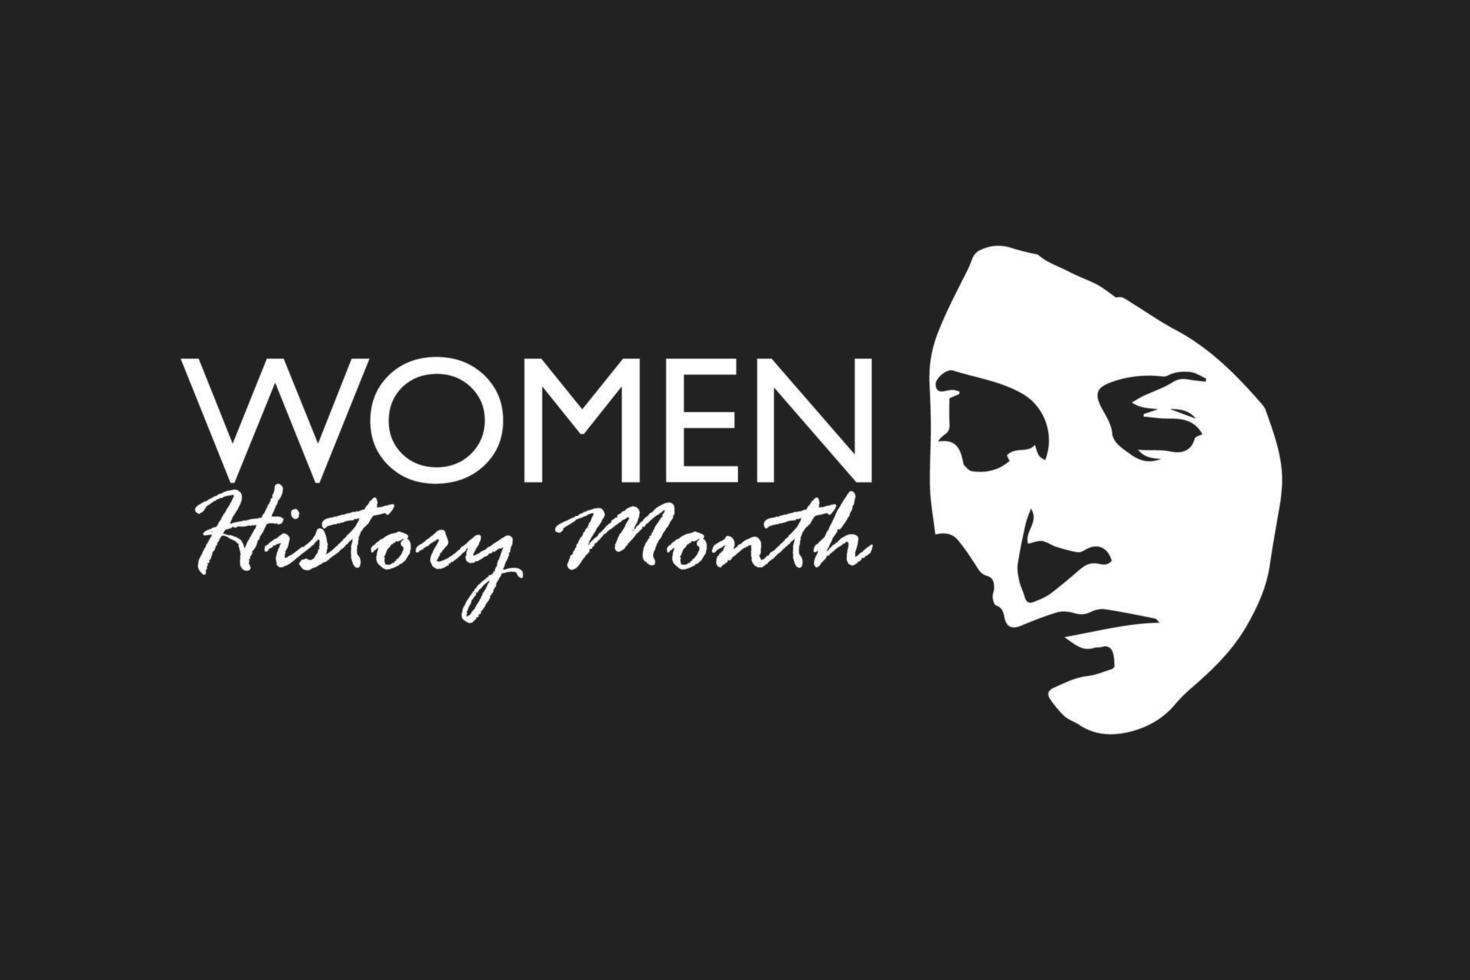 Women's History month is observed every year in March, vector